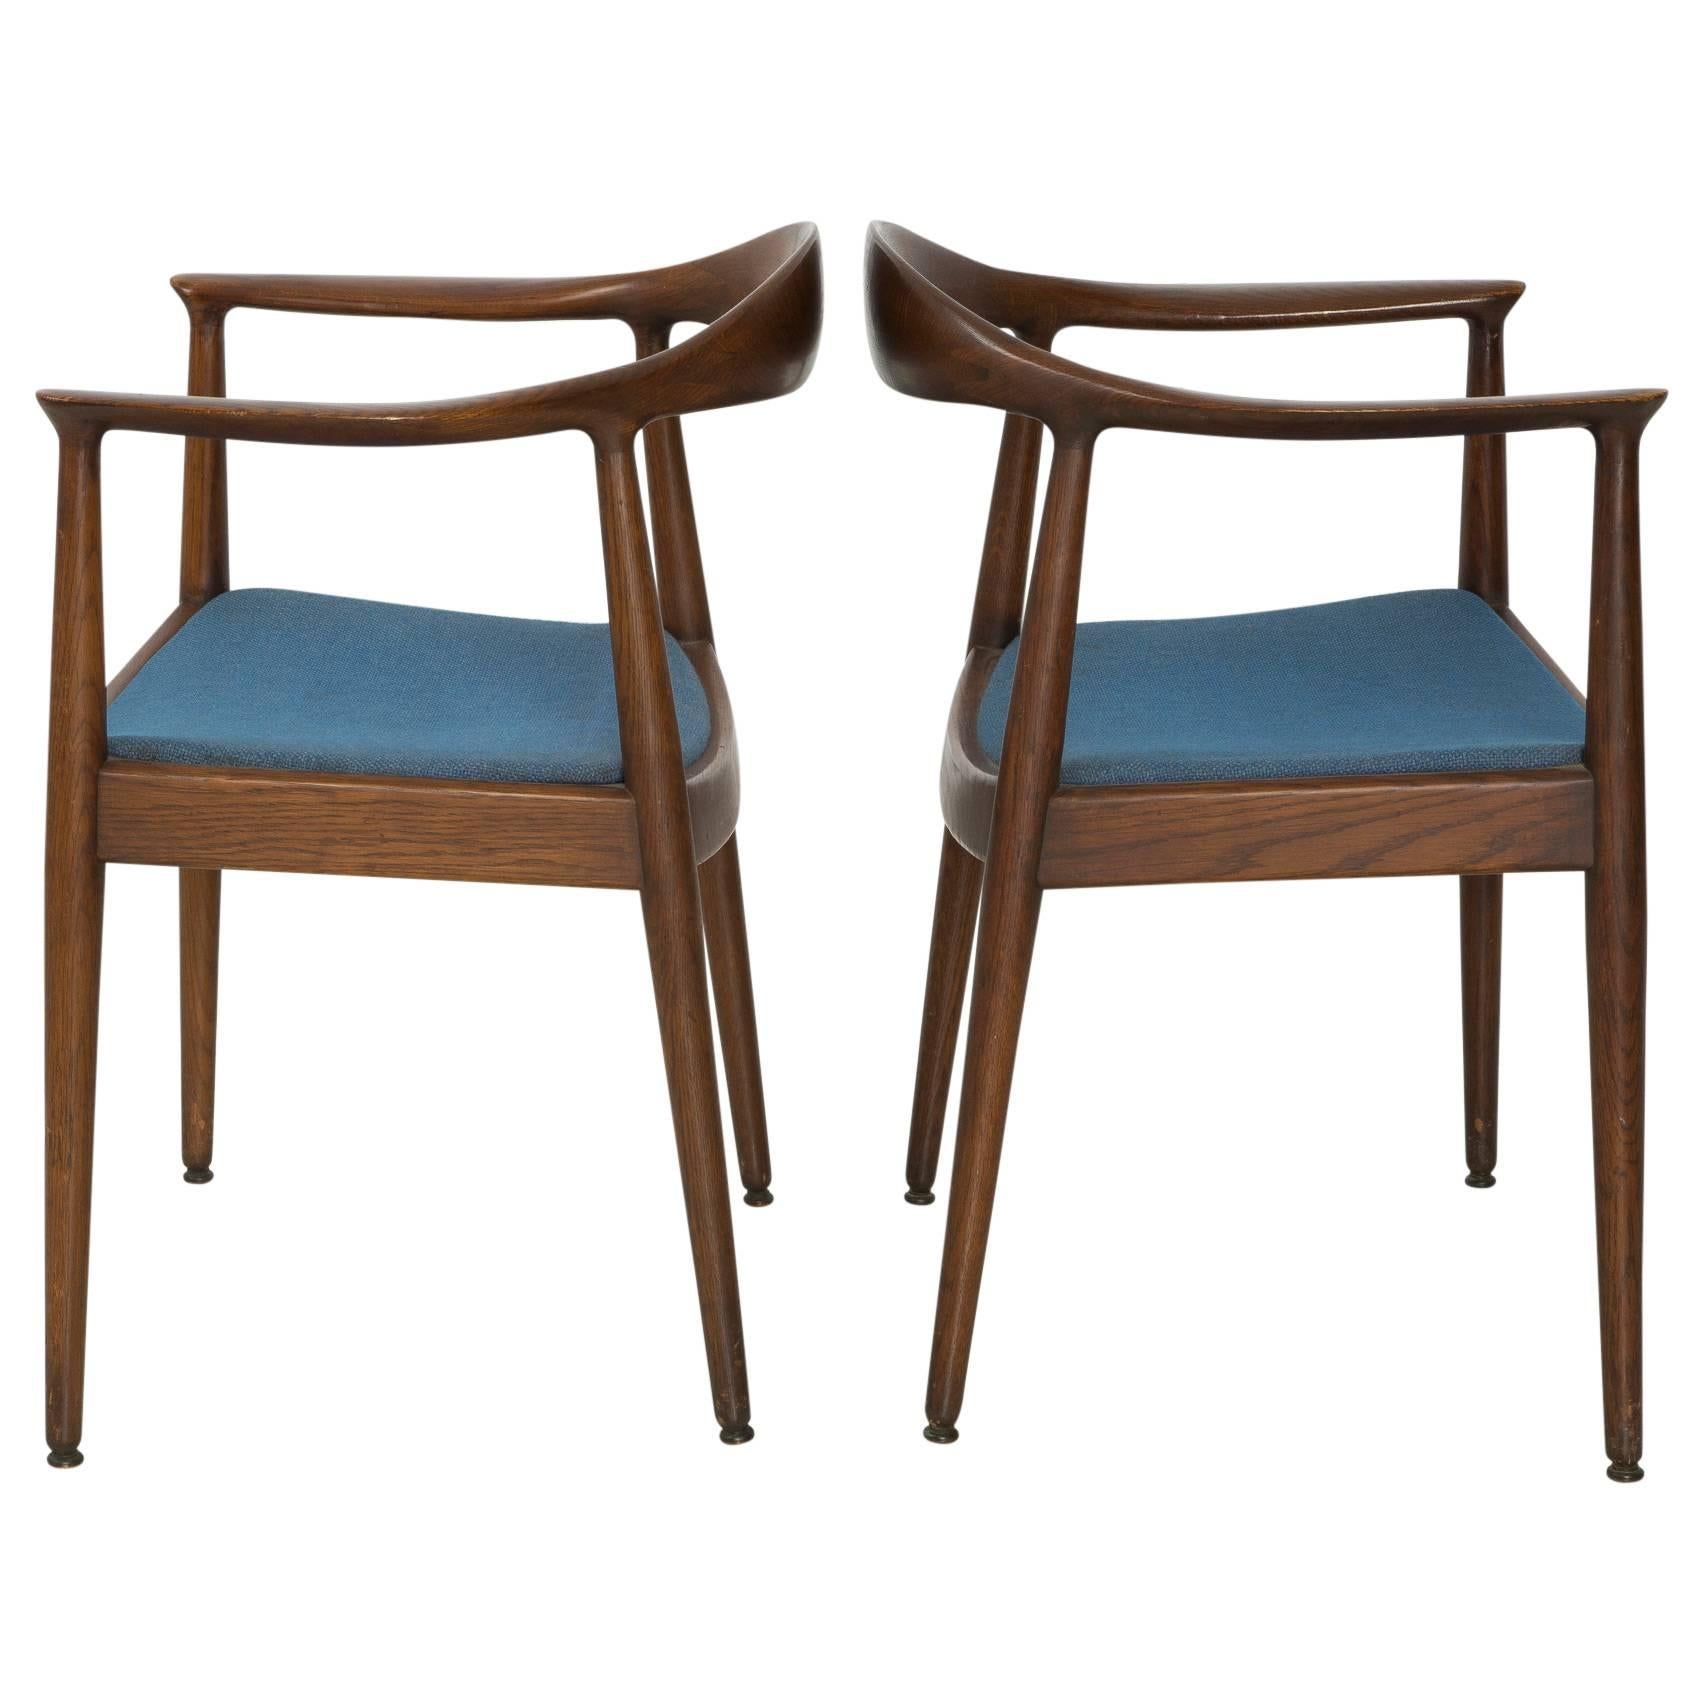 A sculpted pair of Danish Modern arm chairs, attributed to "The Chair" by Hans Wegner, circa 1960. The sinuous lines the rounded oak back rest glide into arm rests. The dark oak frames are a beautiful contrast to the bold, blue upholstery.